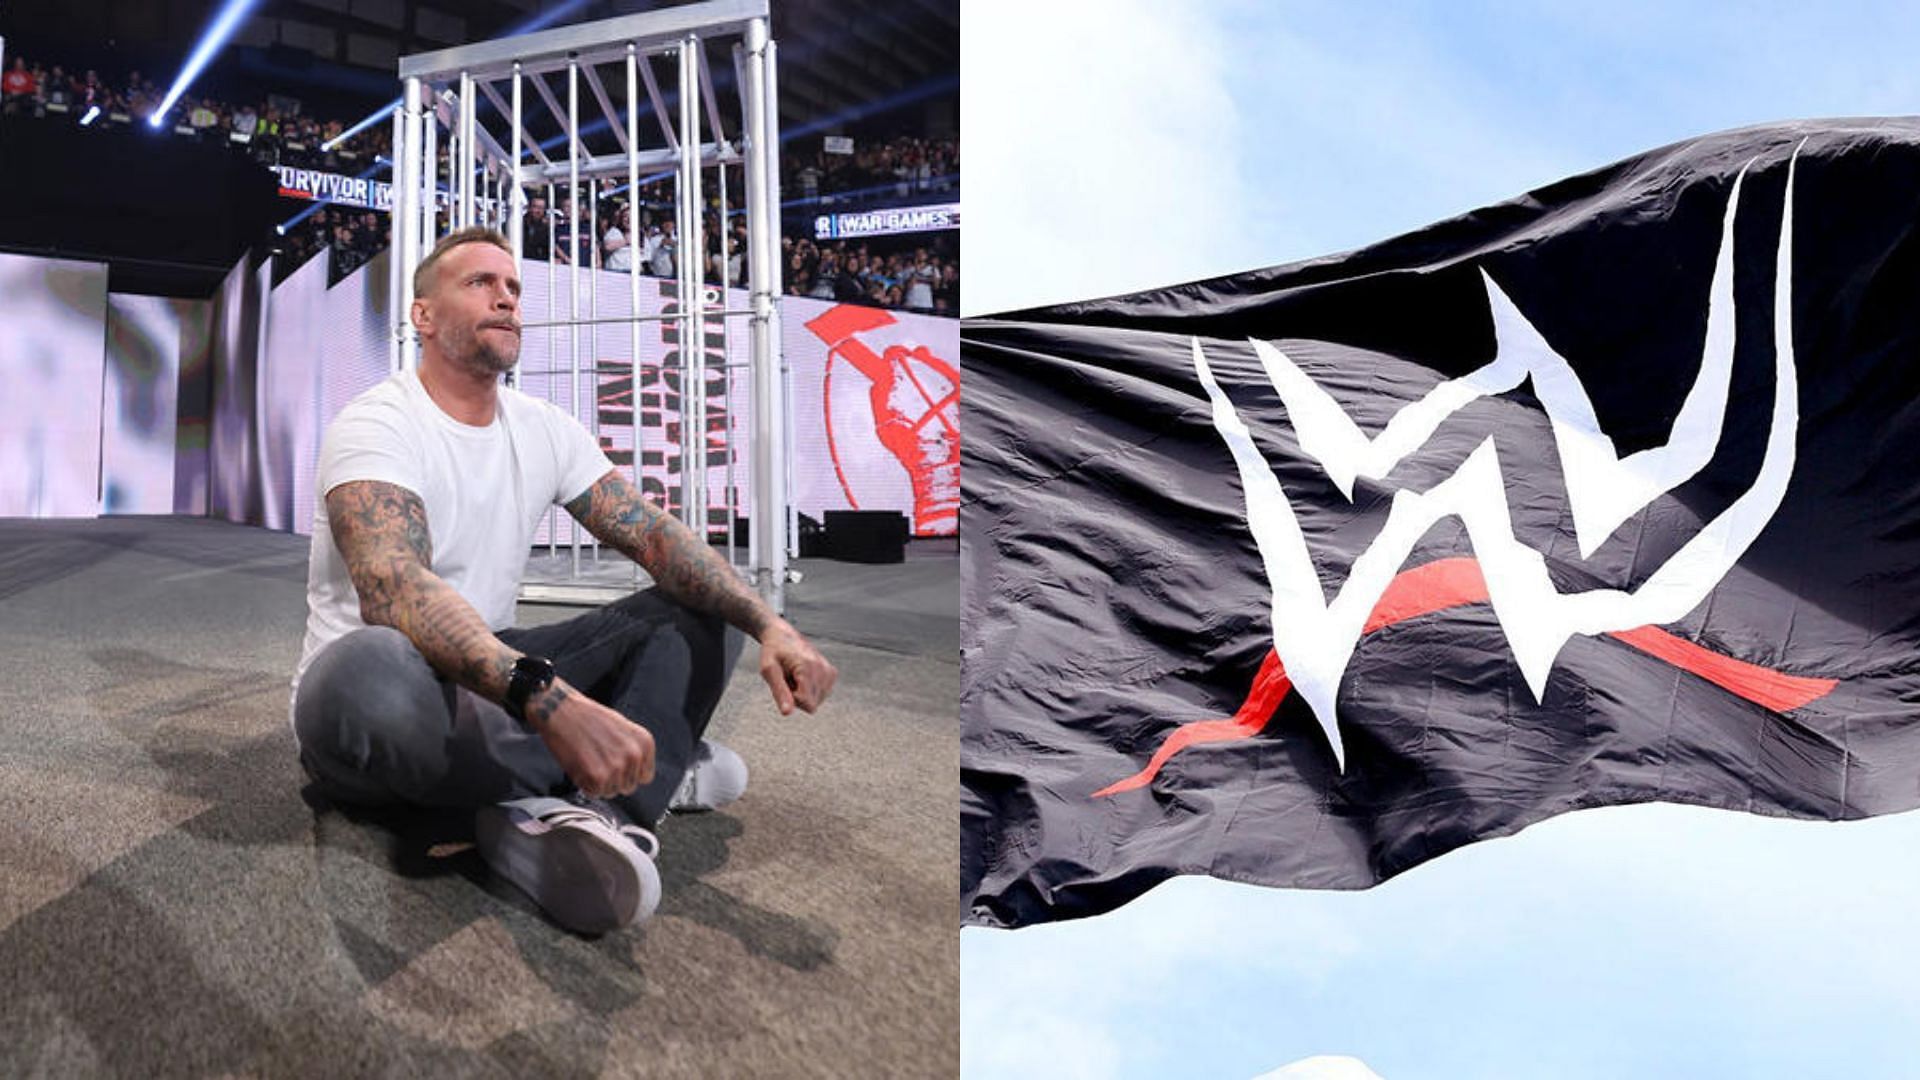 CM Punk returned to WWE after almost a decade